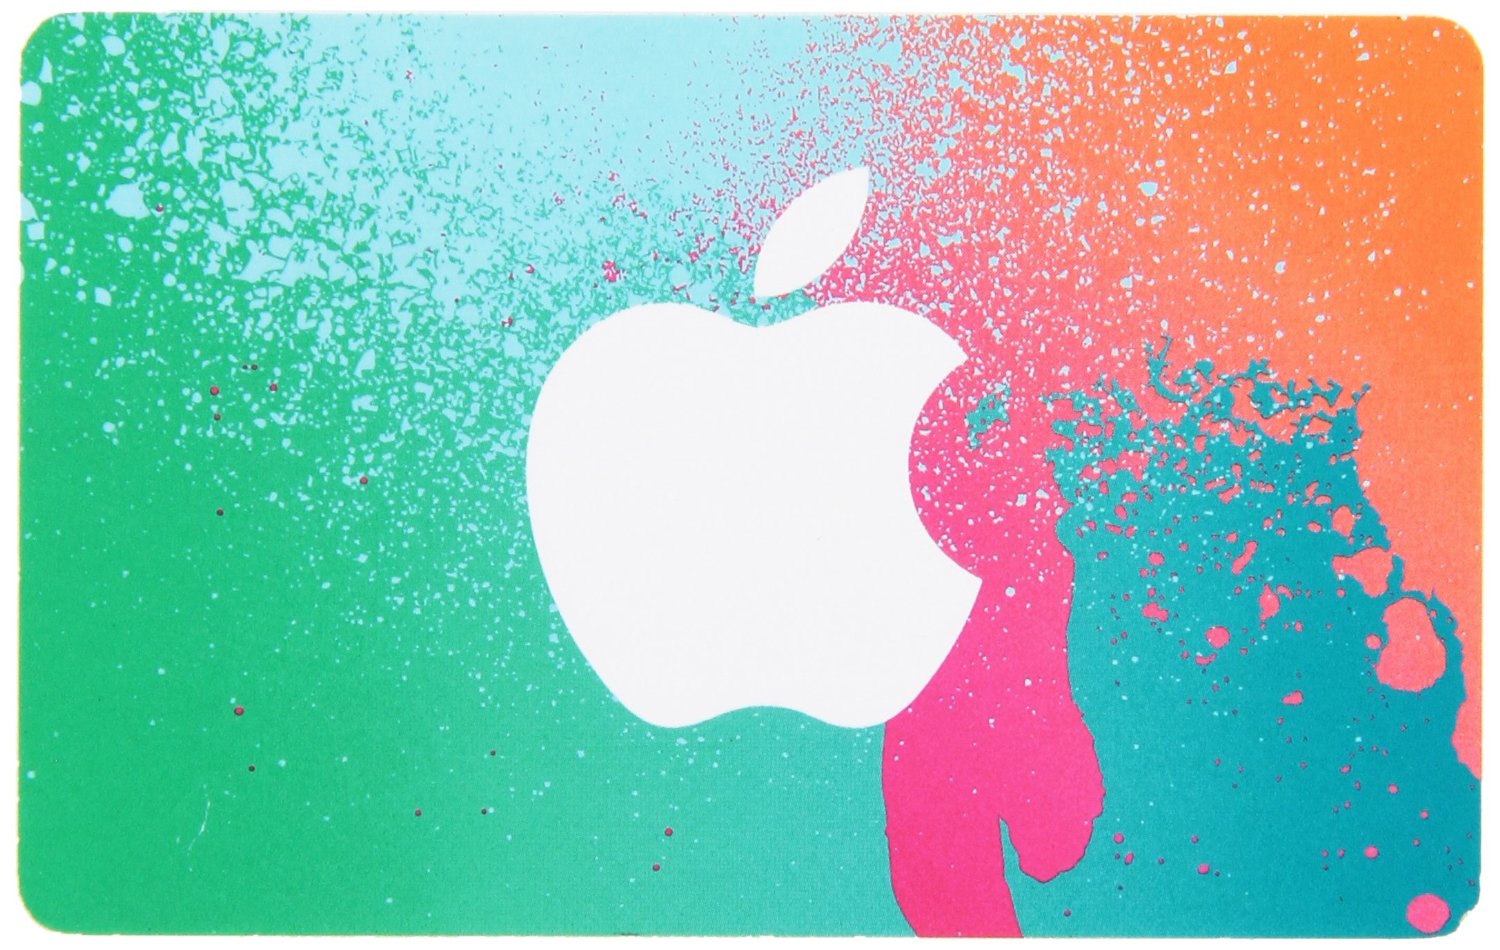 iTunes Gift Card 